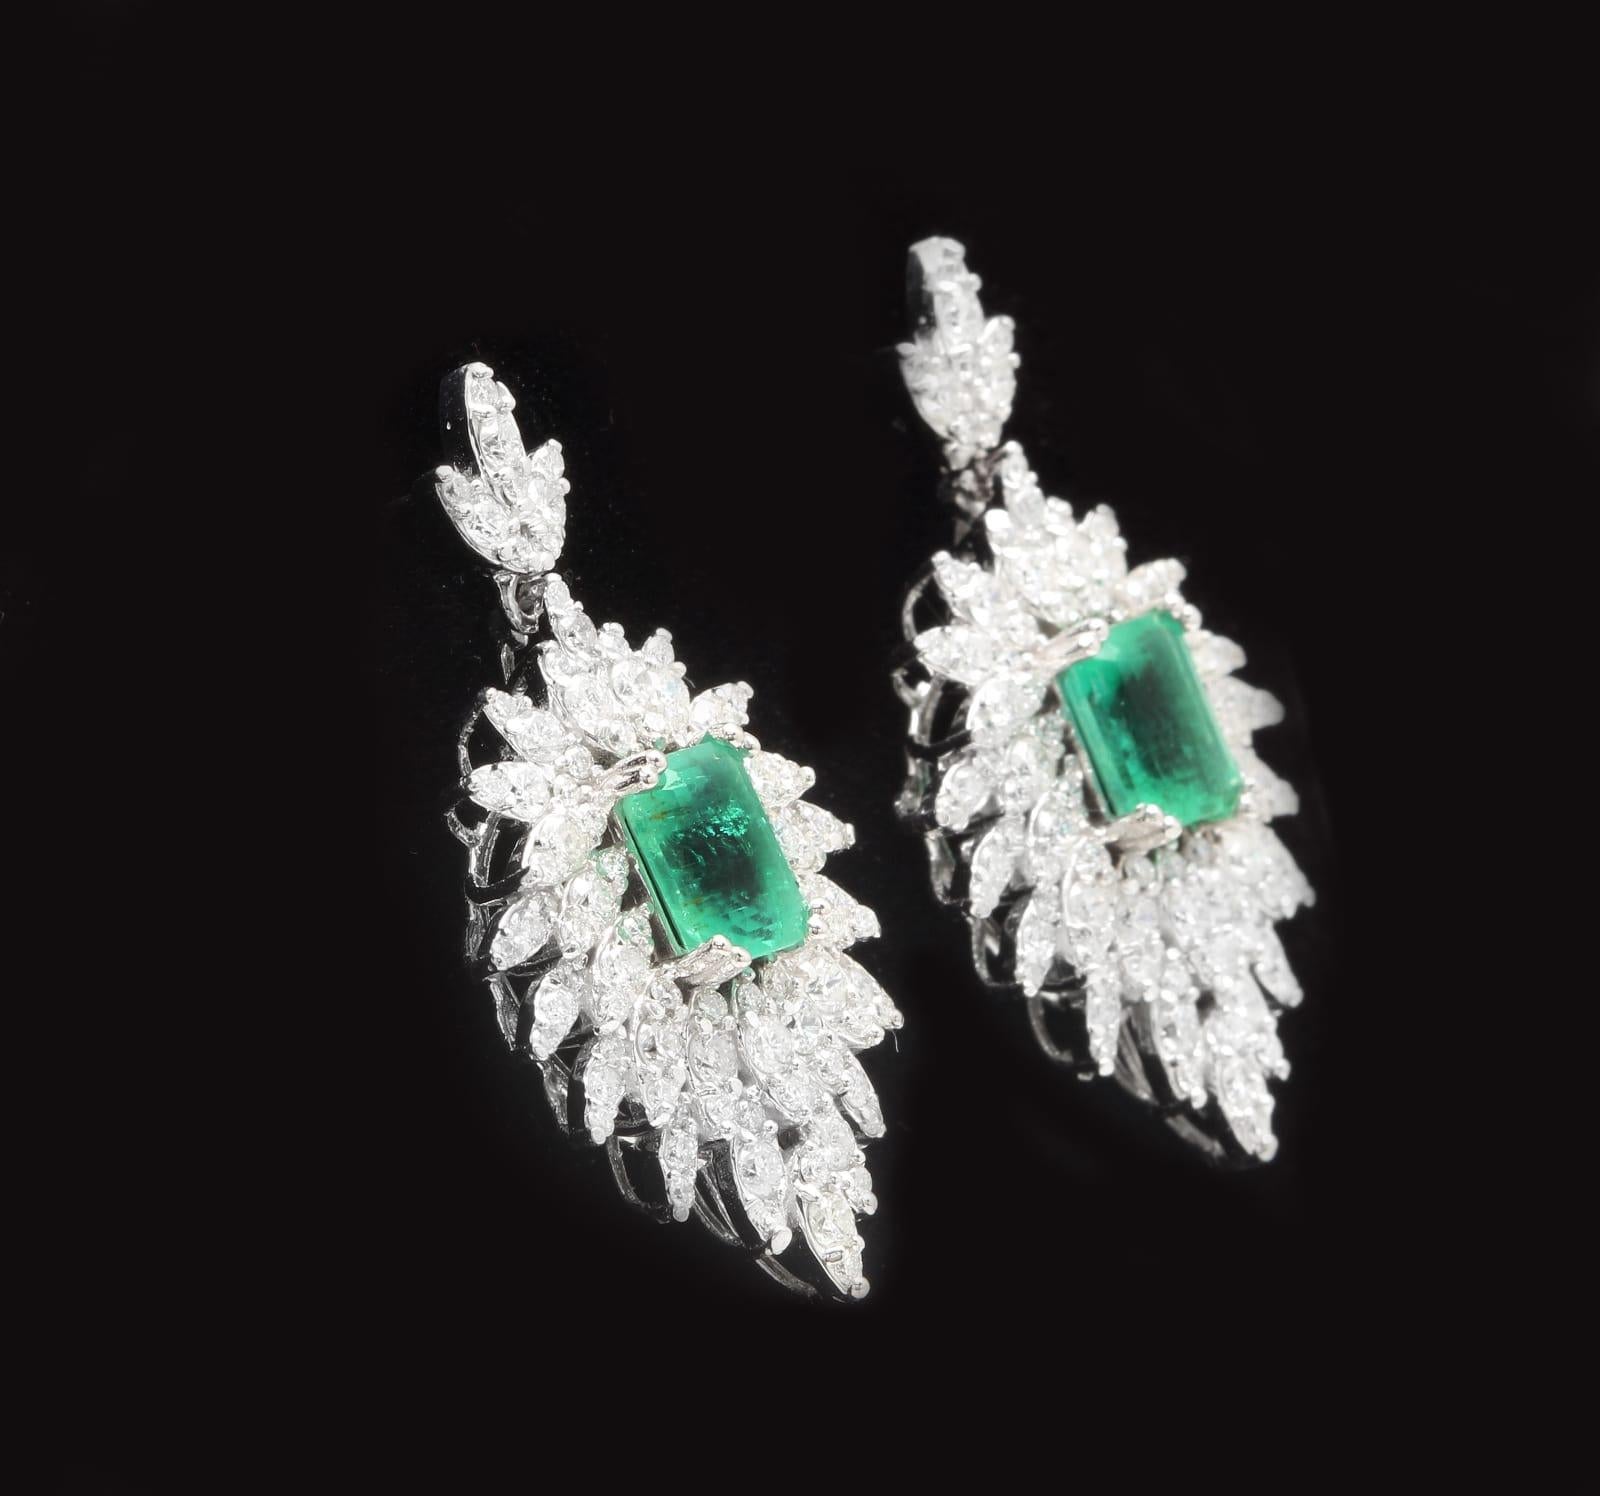 Superb 5.00 Carats Natural Emerald and Diamond 14K Solid White Gold Earrings

Amazing looking piece!

Suggested Replacement Value Approx. $8,000.00

Total Natural Round Cut White Diamonds Weight: Approx. 2.50 Carats (color G-H / Clarity